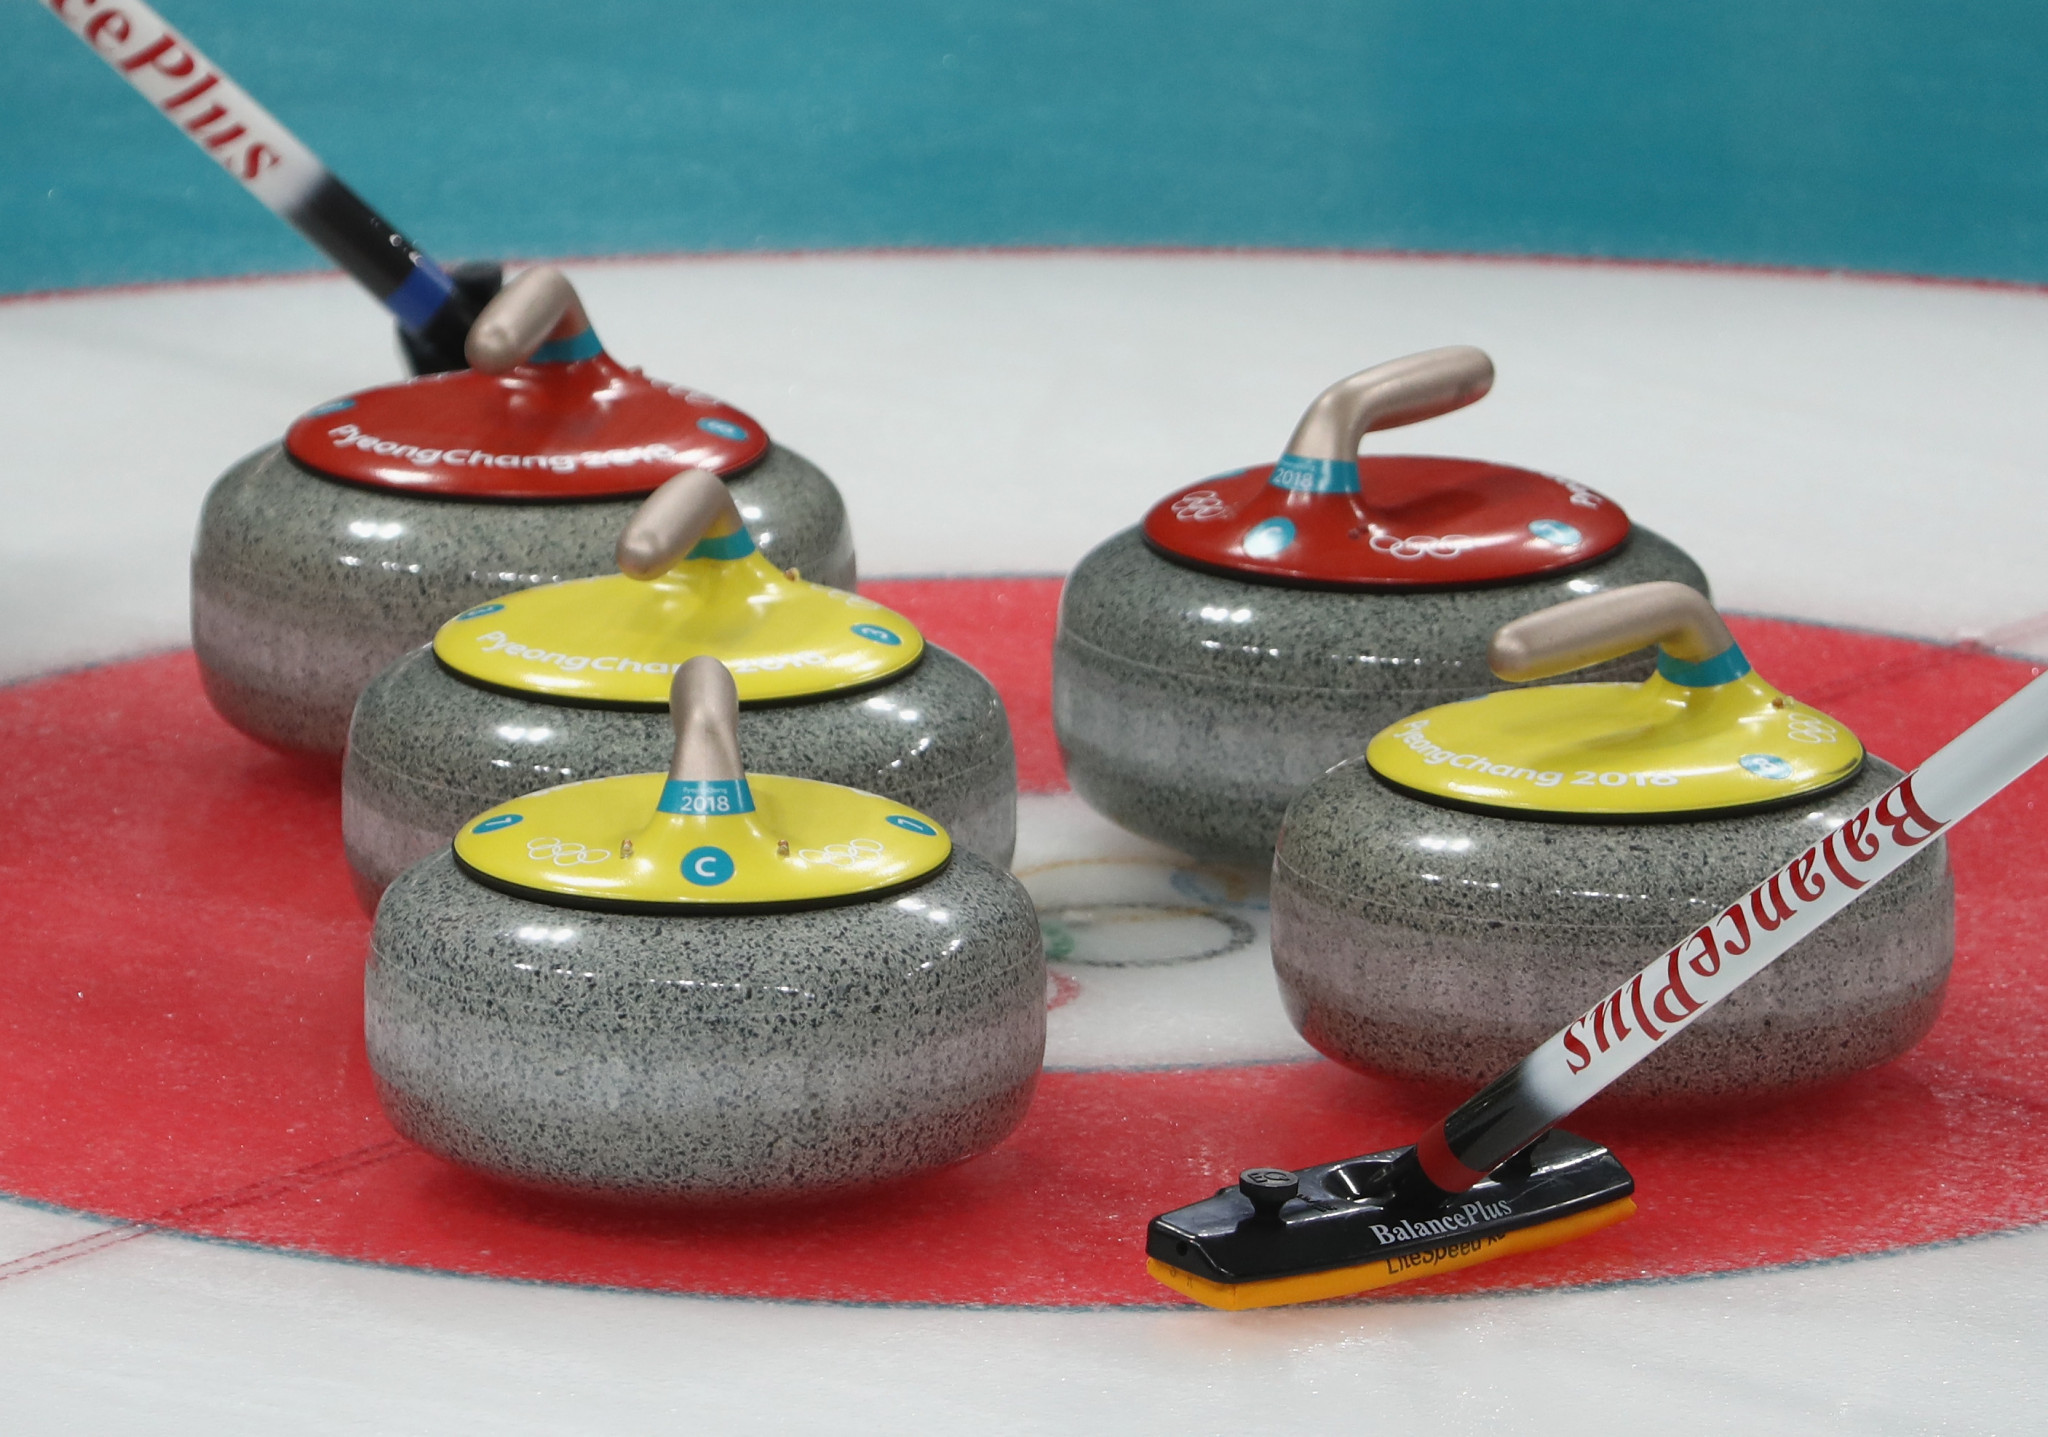 New Holland is set to be the presenting sponsor of the World Men's Curling Championship ©WCF